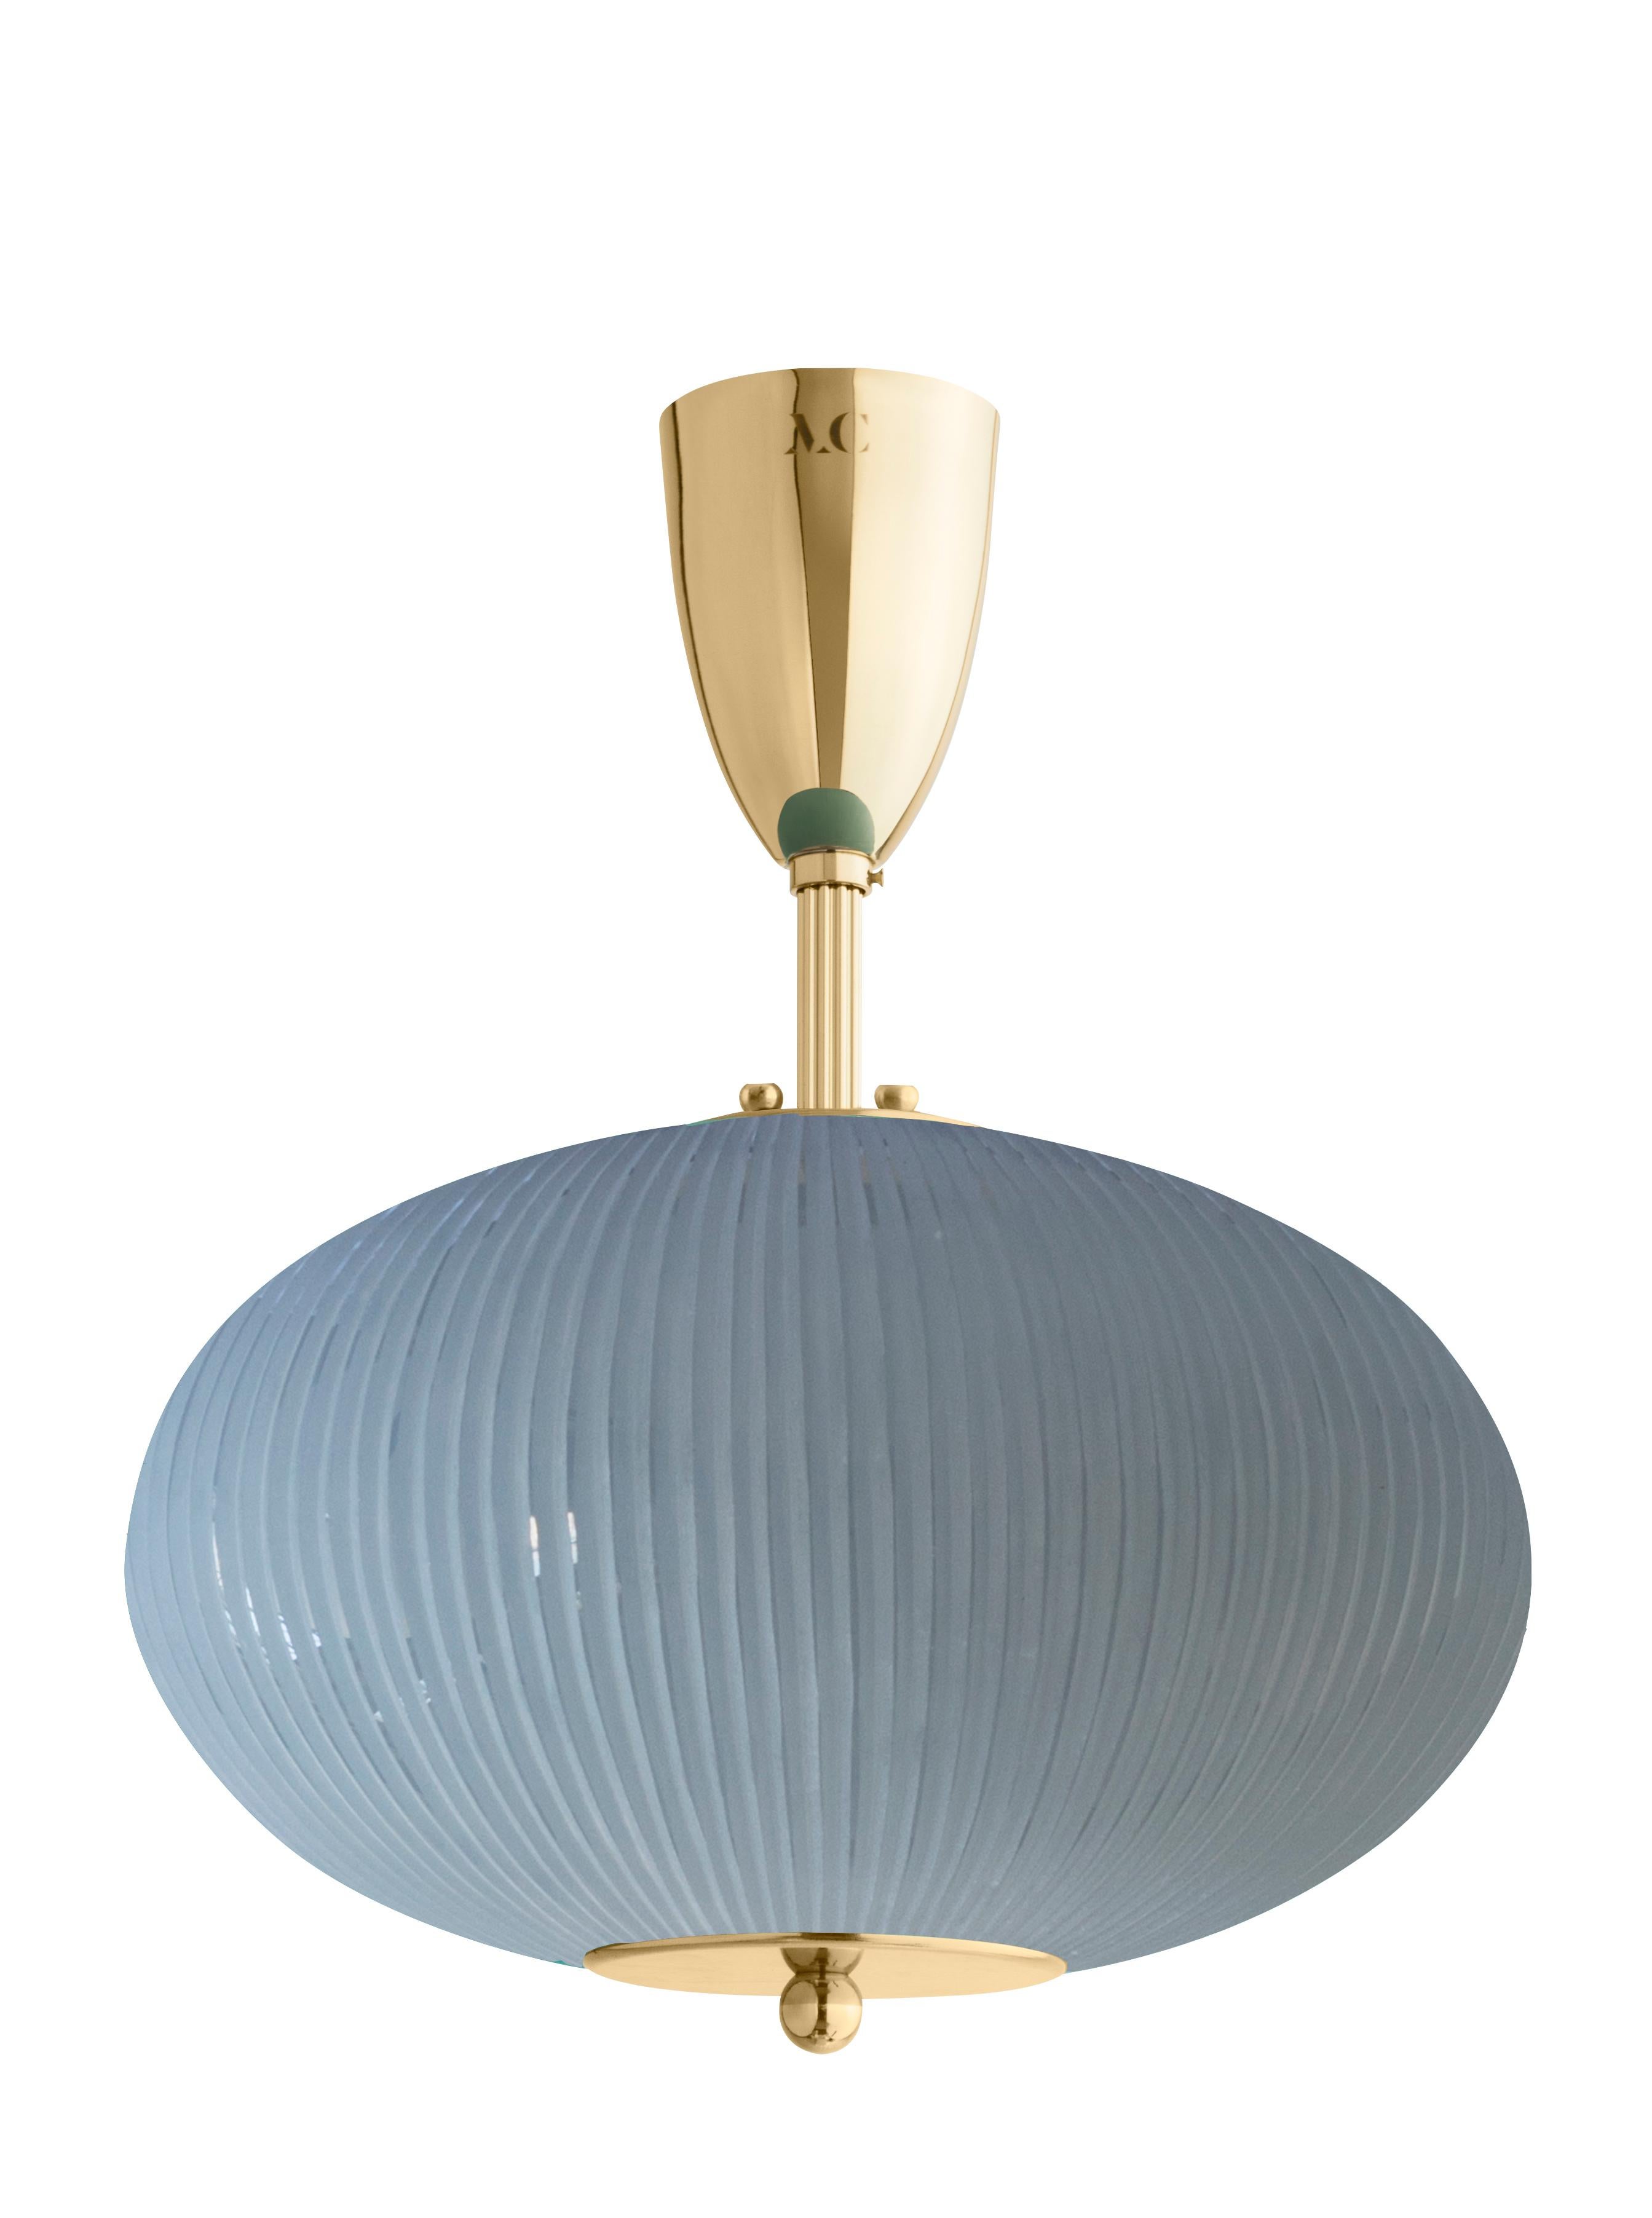 Ceiling lamp China 07 by Magic Circus Editions
Dimensions: H 40 x W 32 x D 32 cm
Materials: Brass, mouth blown glass sculpted with a diamond saw
Colour: opal grey

Available finishes: Brass, nickel
Available colours: enamel soft white, soft